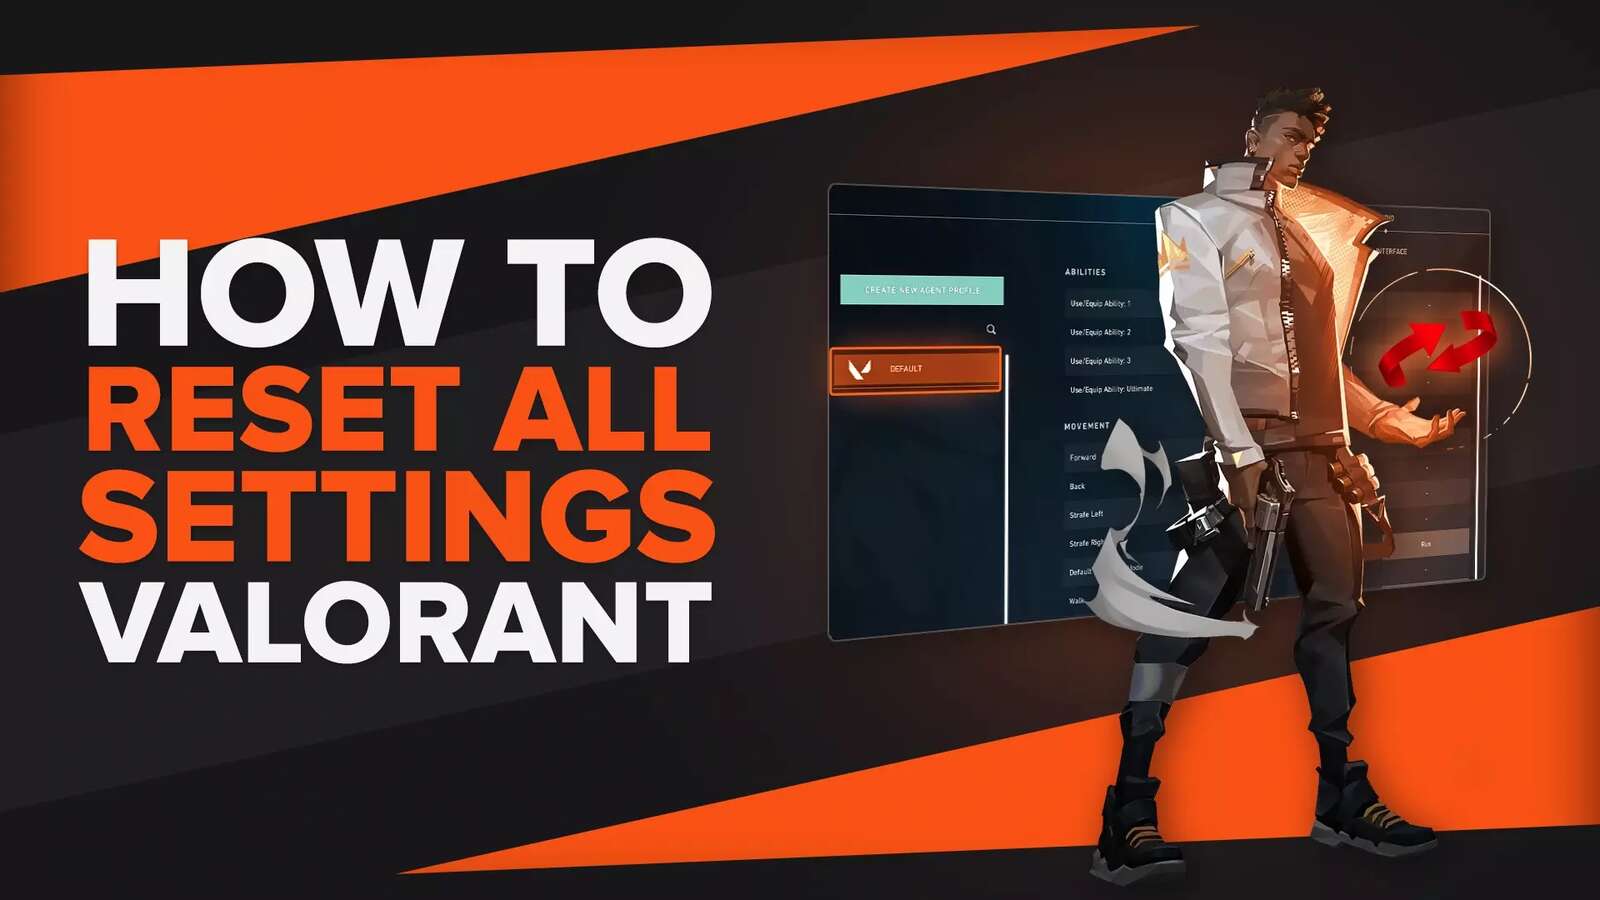 How To Reset All Settings Valorant [2 Methods]